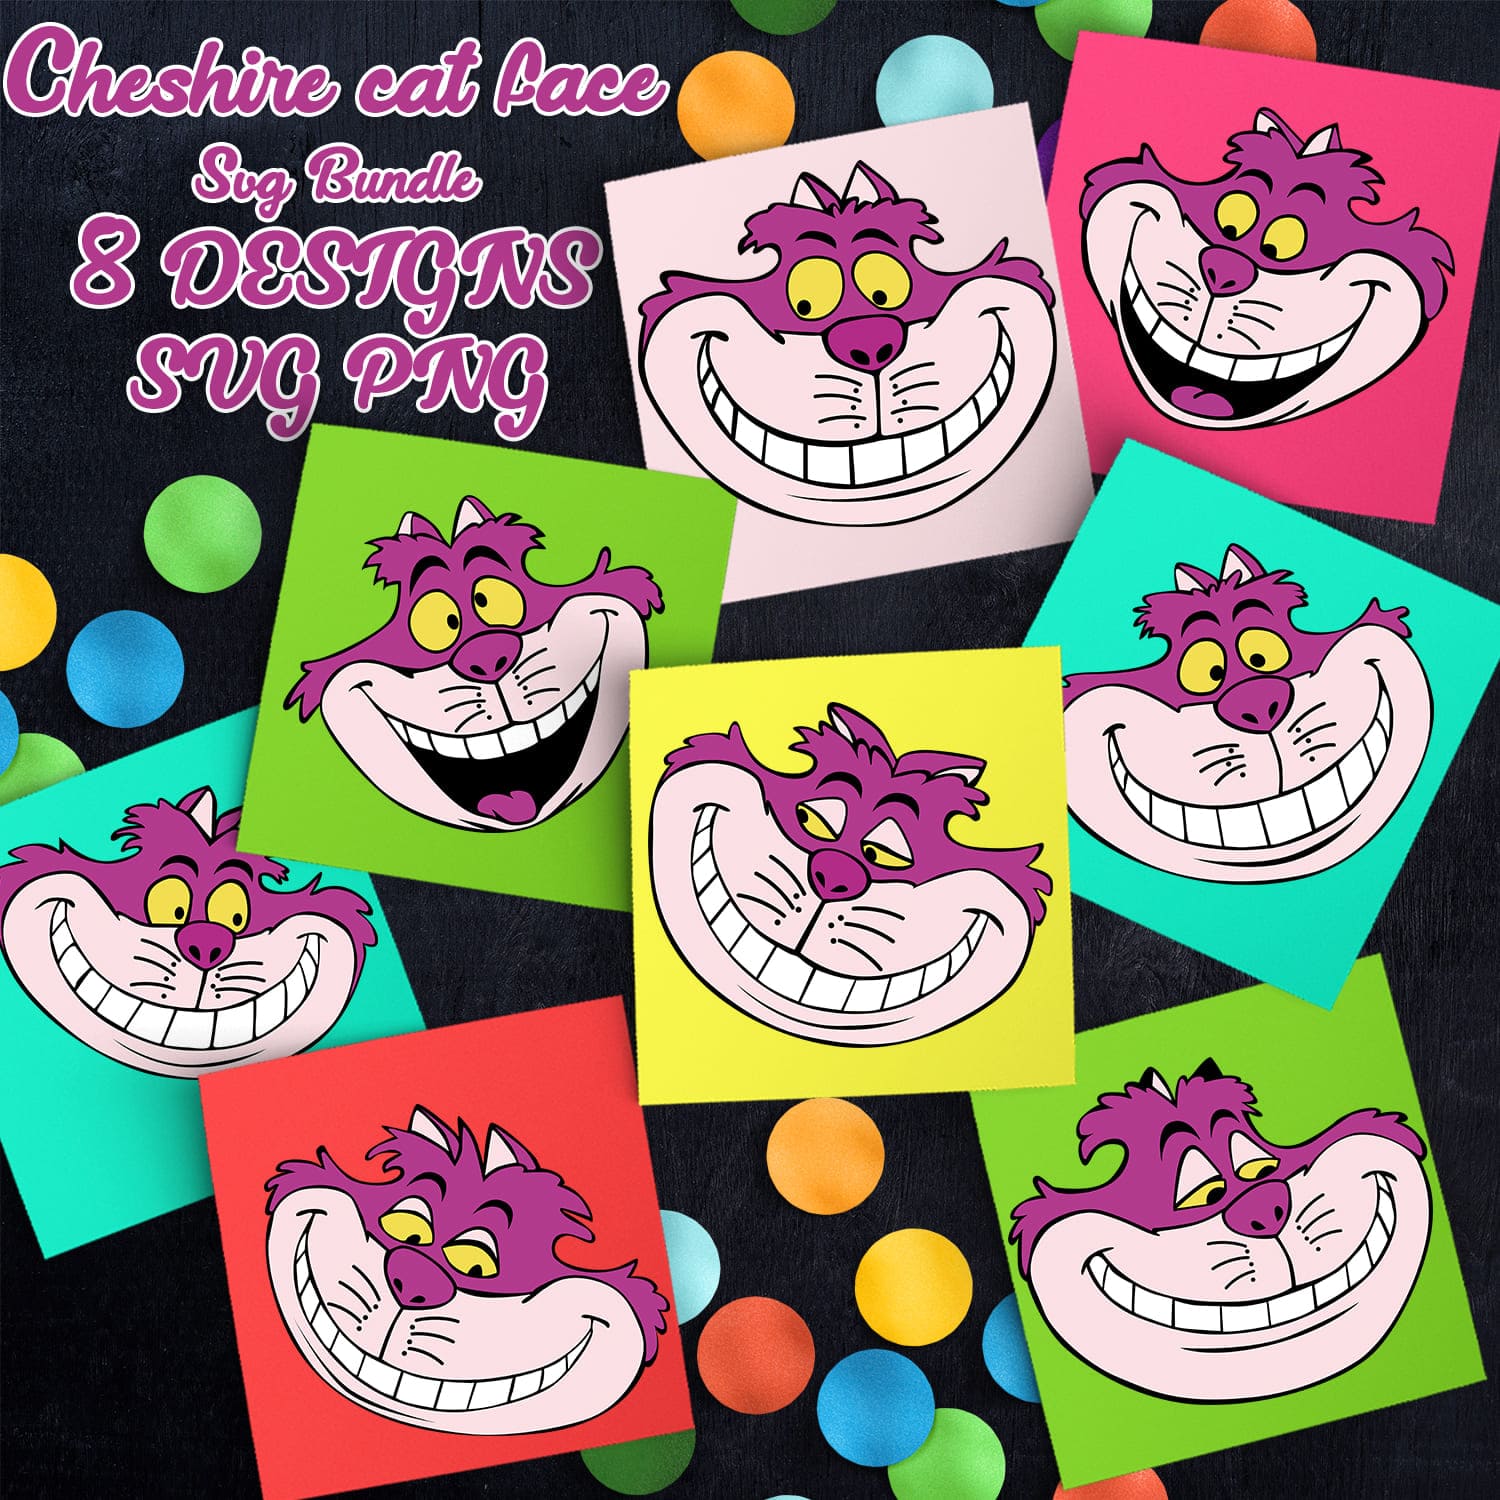 cheshire cat face svg.